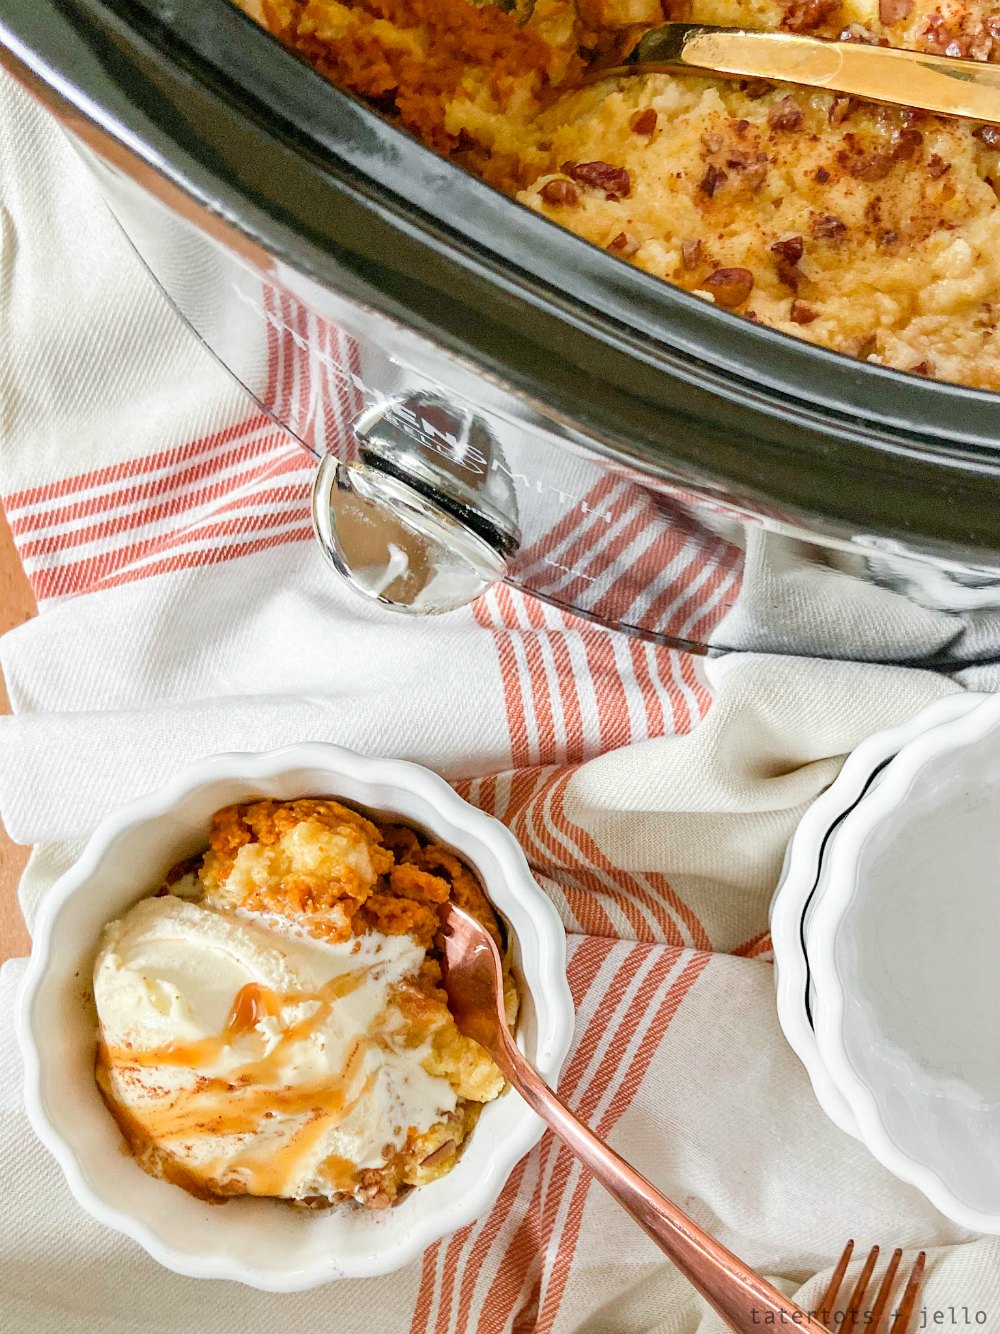 Crockpot Pumpkin Pie Dump Cake. Want an easy dessert to make for fall? Whip up this easy Pumpkin Pie Dump Cake which only takes 5 minutes to prep and then cooks in your crockpot and makes your home smell so good! 